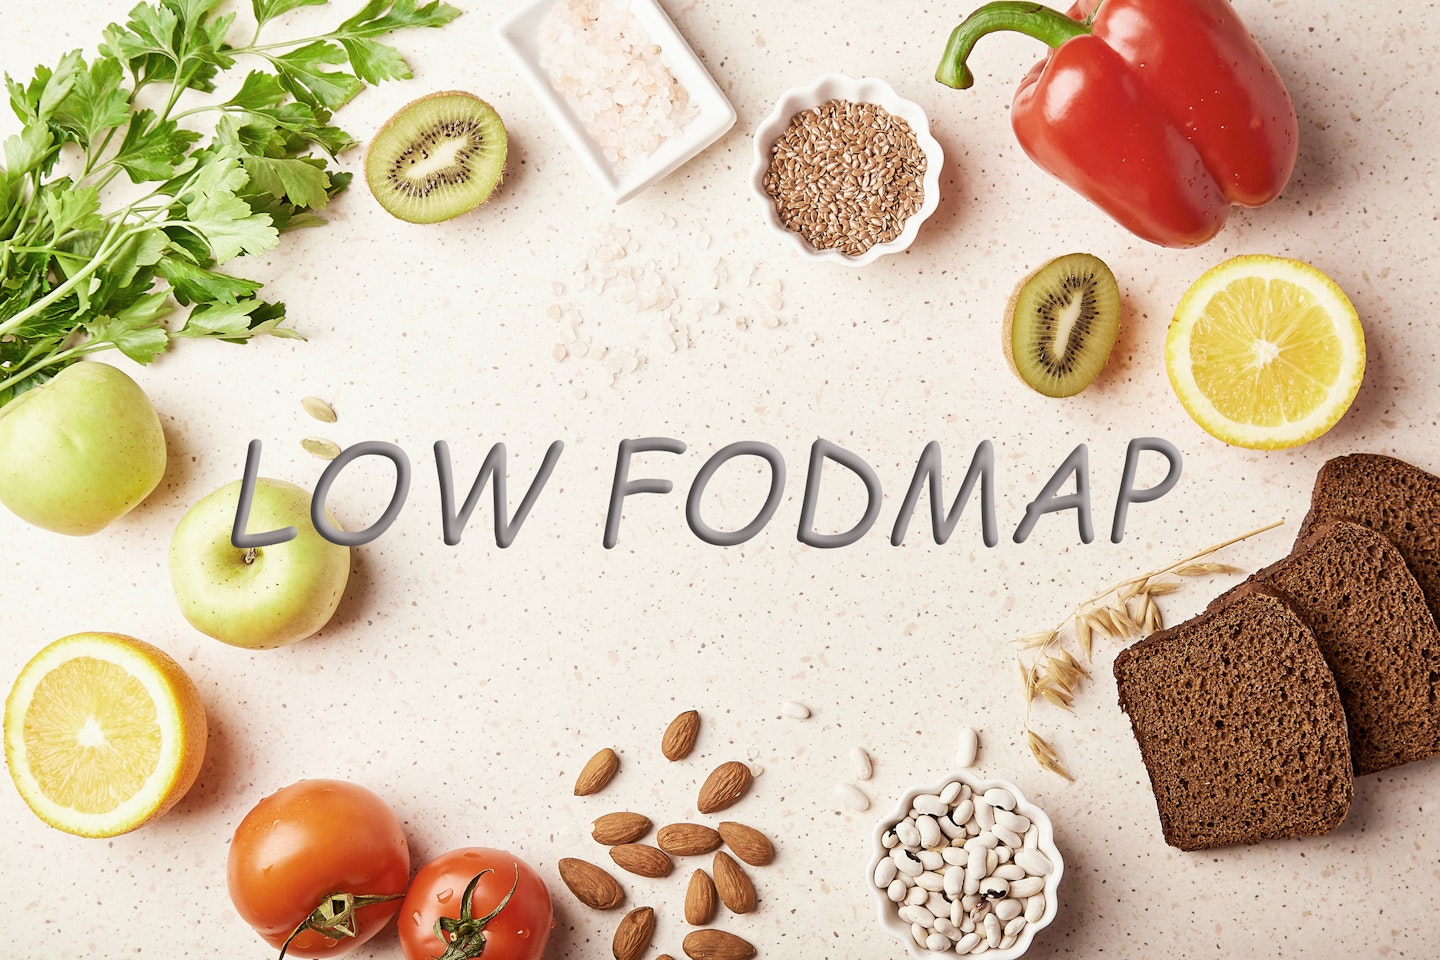 Low FODMAP concept with with fruits,vegetables, greens, nuts, beans, flax seeds, chia seeds, wholegrain bread.